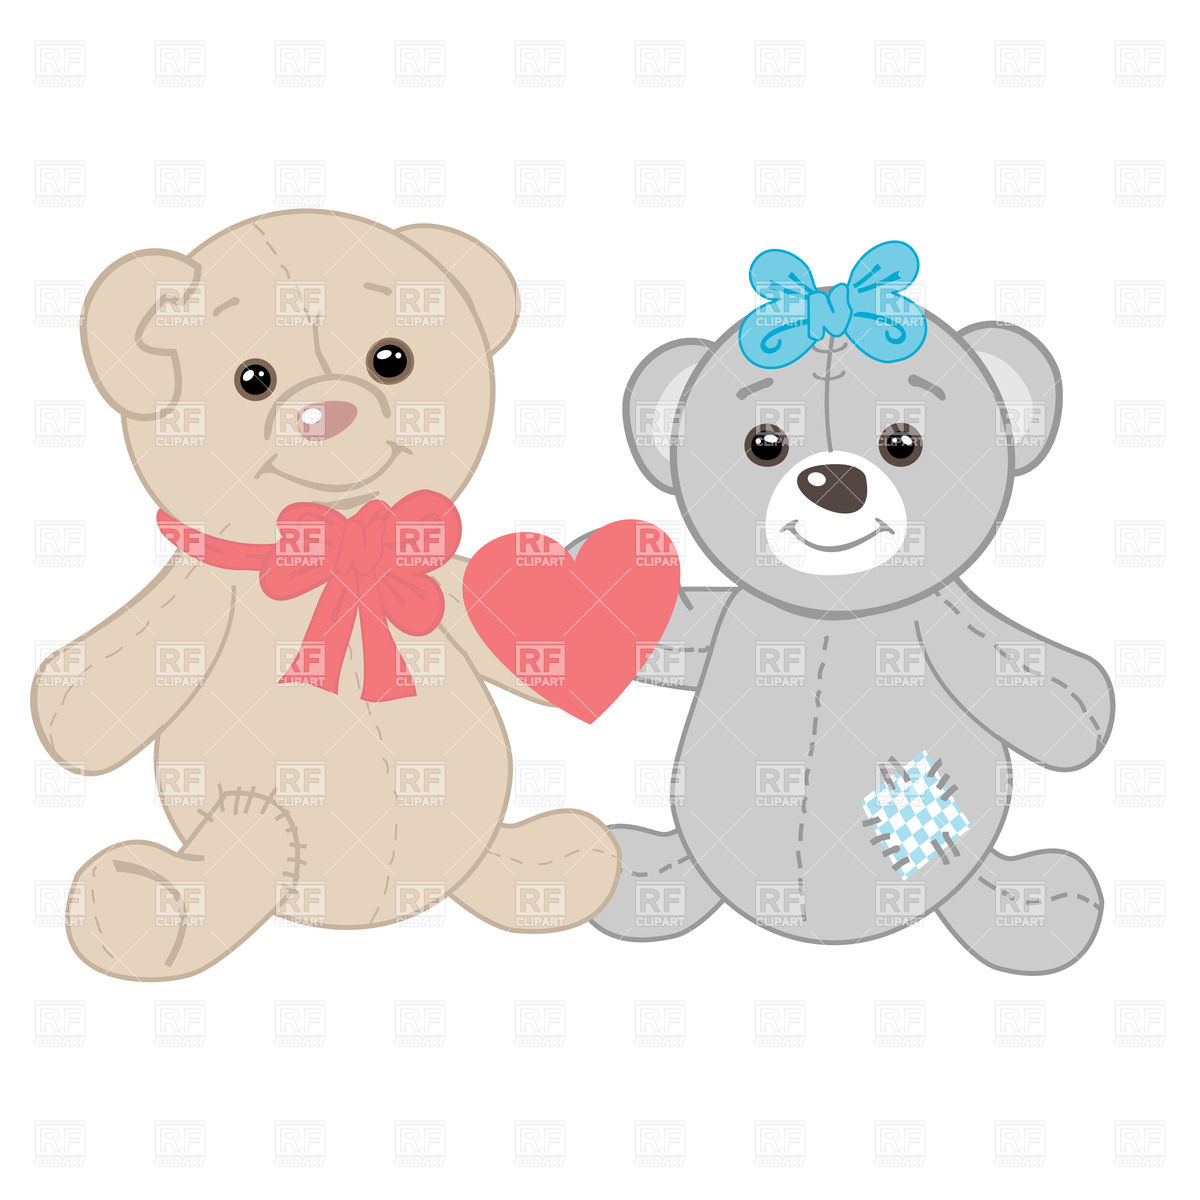 Two Teddy Bears With Red Heart 22442 Download Royalty Free Vector